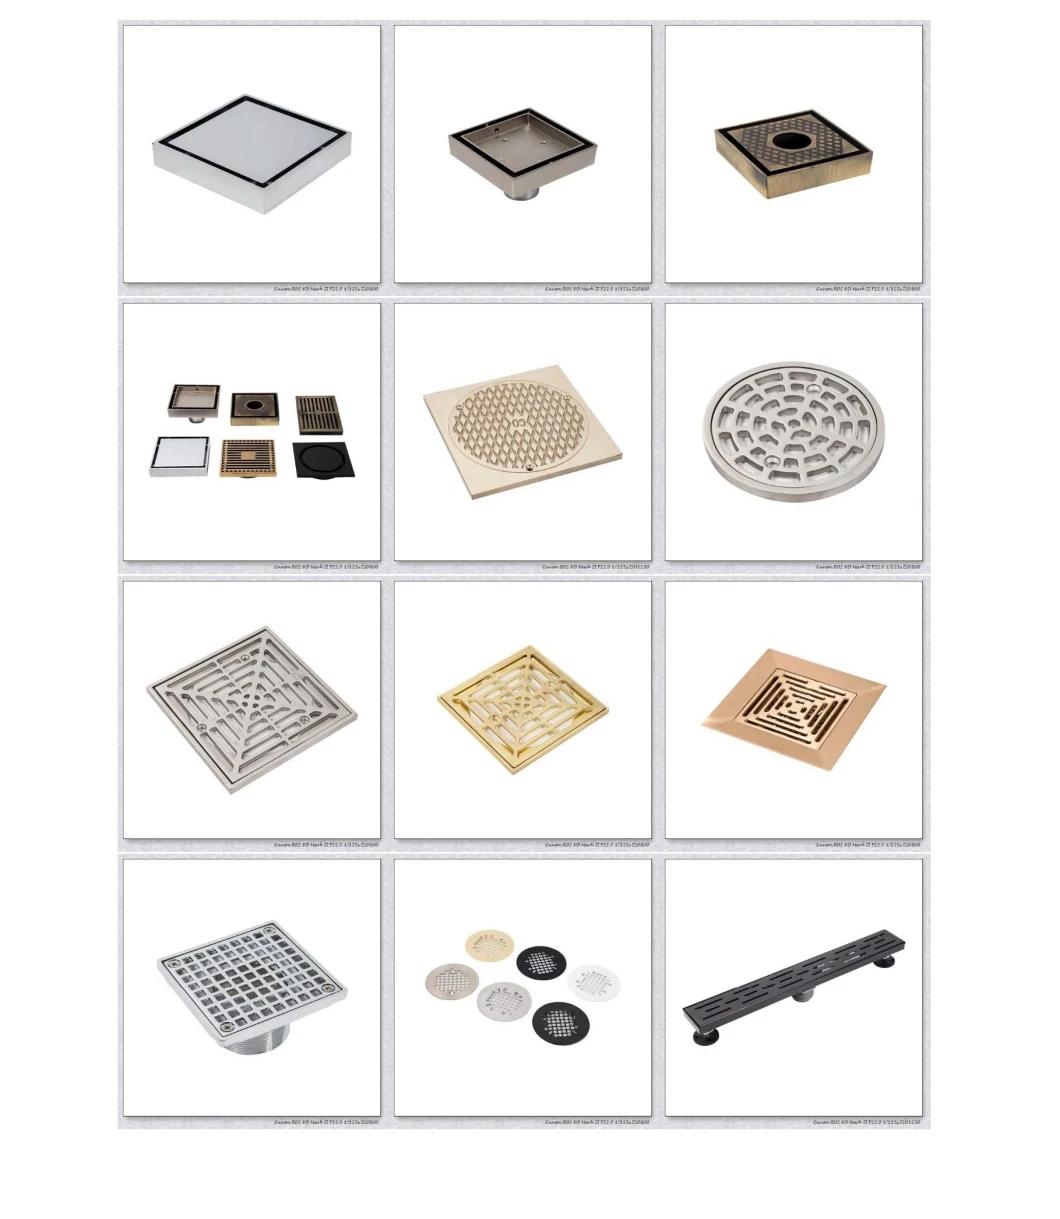 4 Inch Removable Square Shower Drain Cover